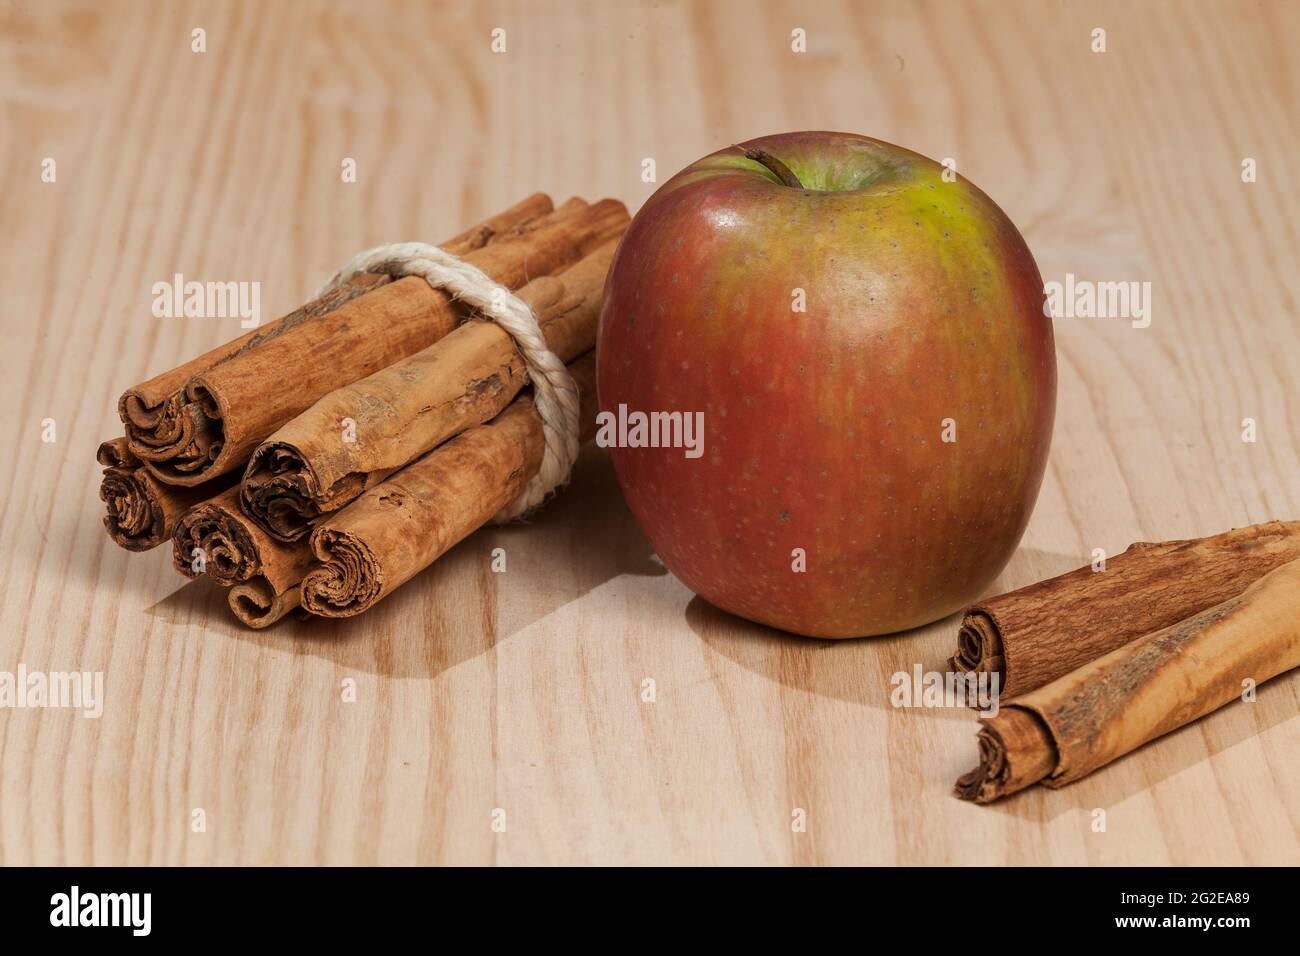 Red apple with a cinnamon stick; photo on wooden background. Stock Photo